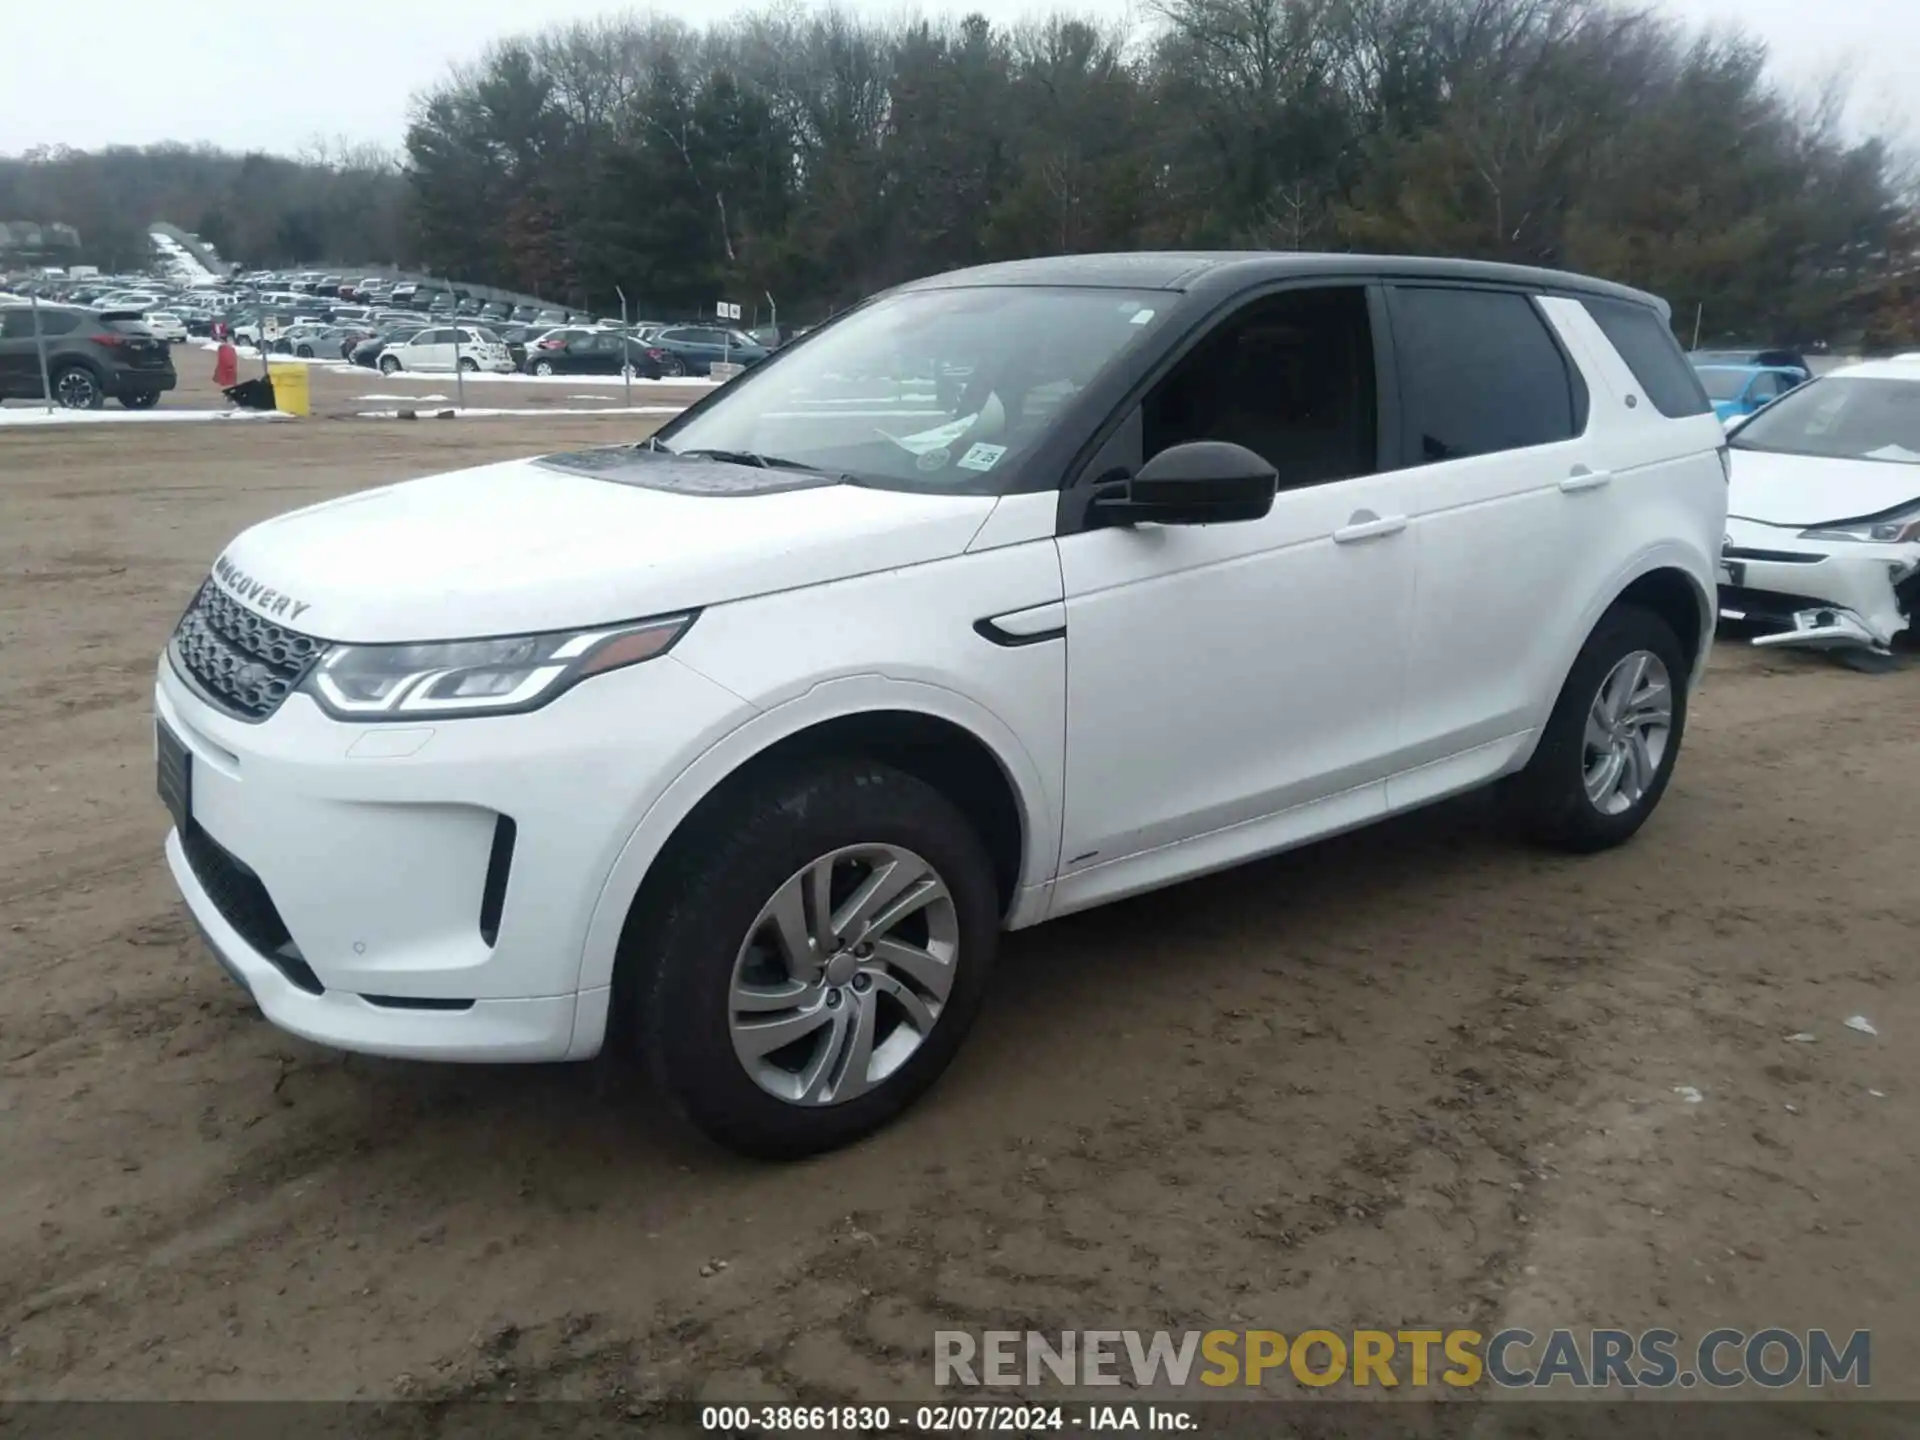 2 Photograph of a damaged car SALCT2FXXLH859485 LAND ROVER DISCOVERY SPORT 2020